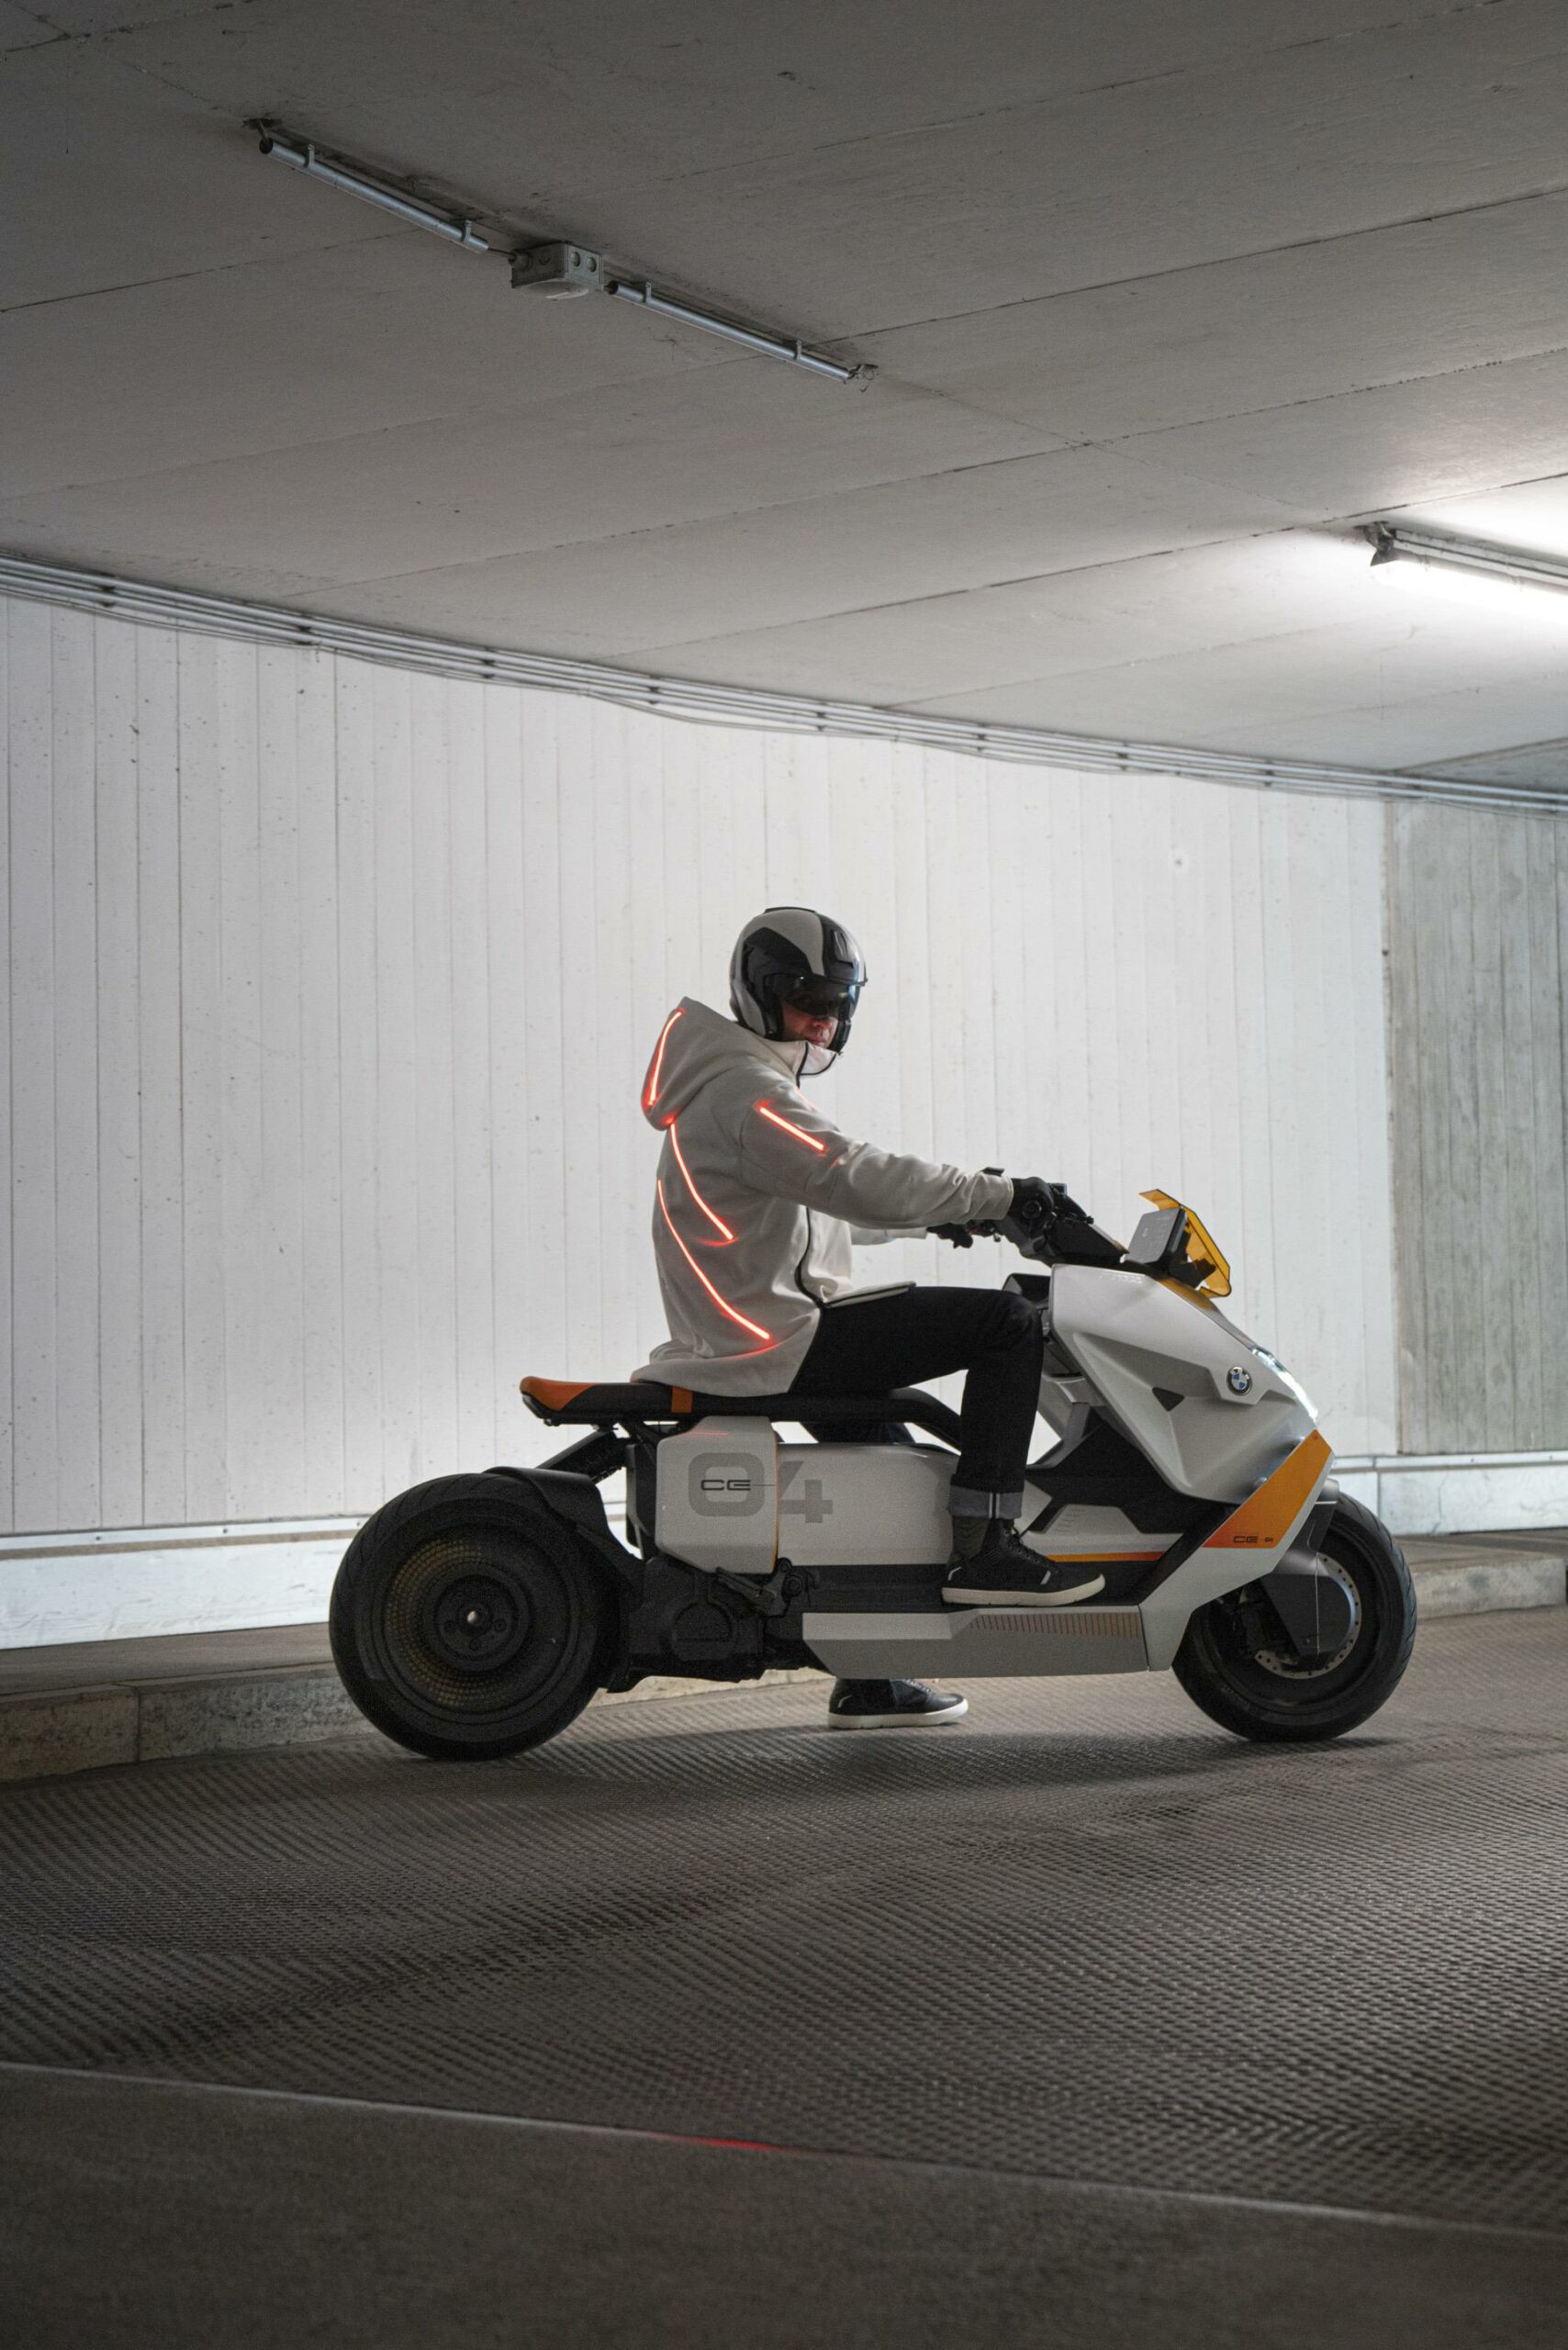 BMW Motorrad Definition CE 04 - Commute In Purely Electric Fashion